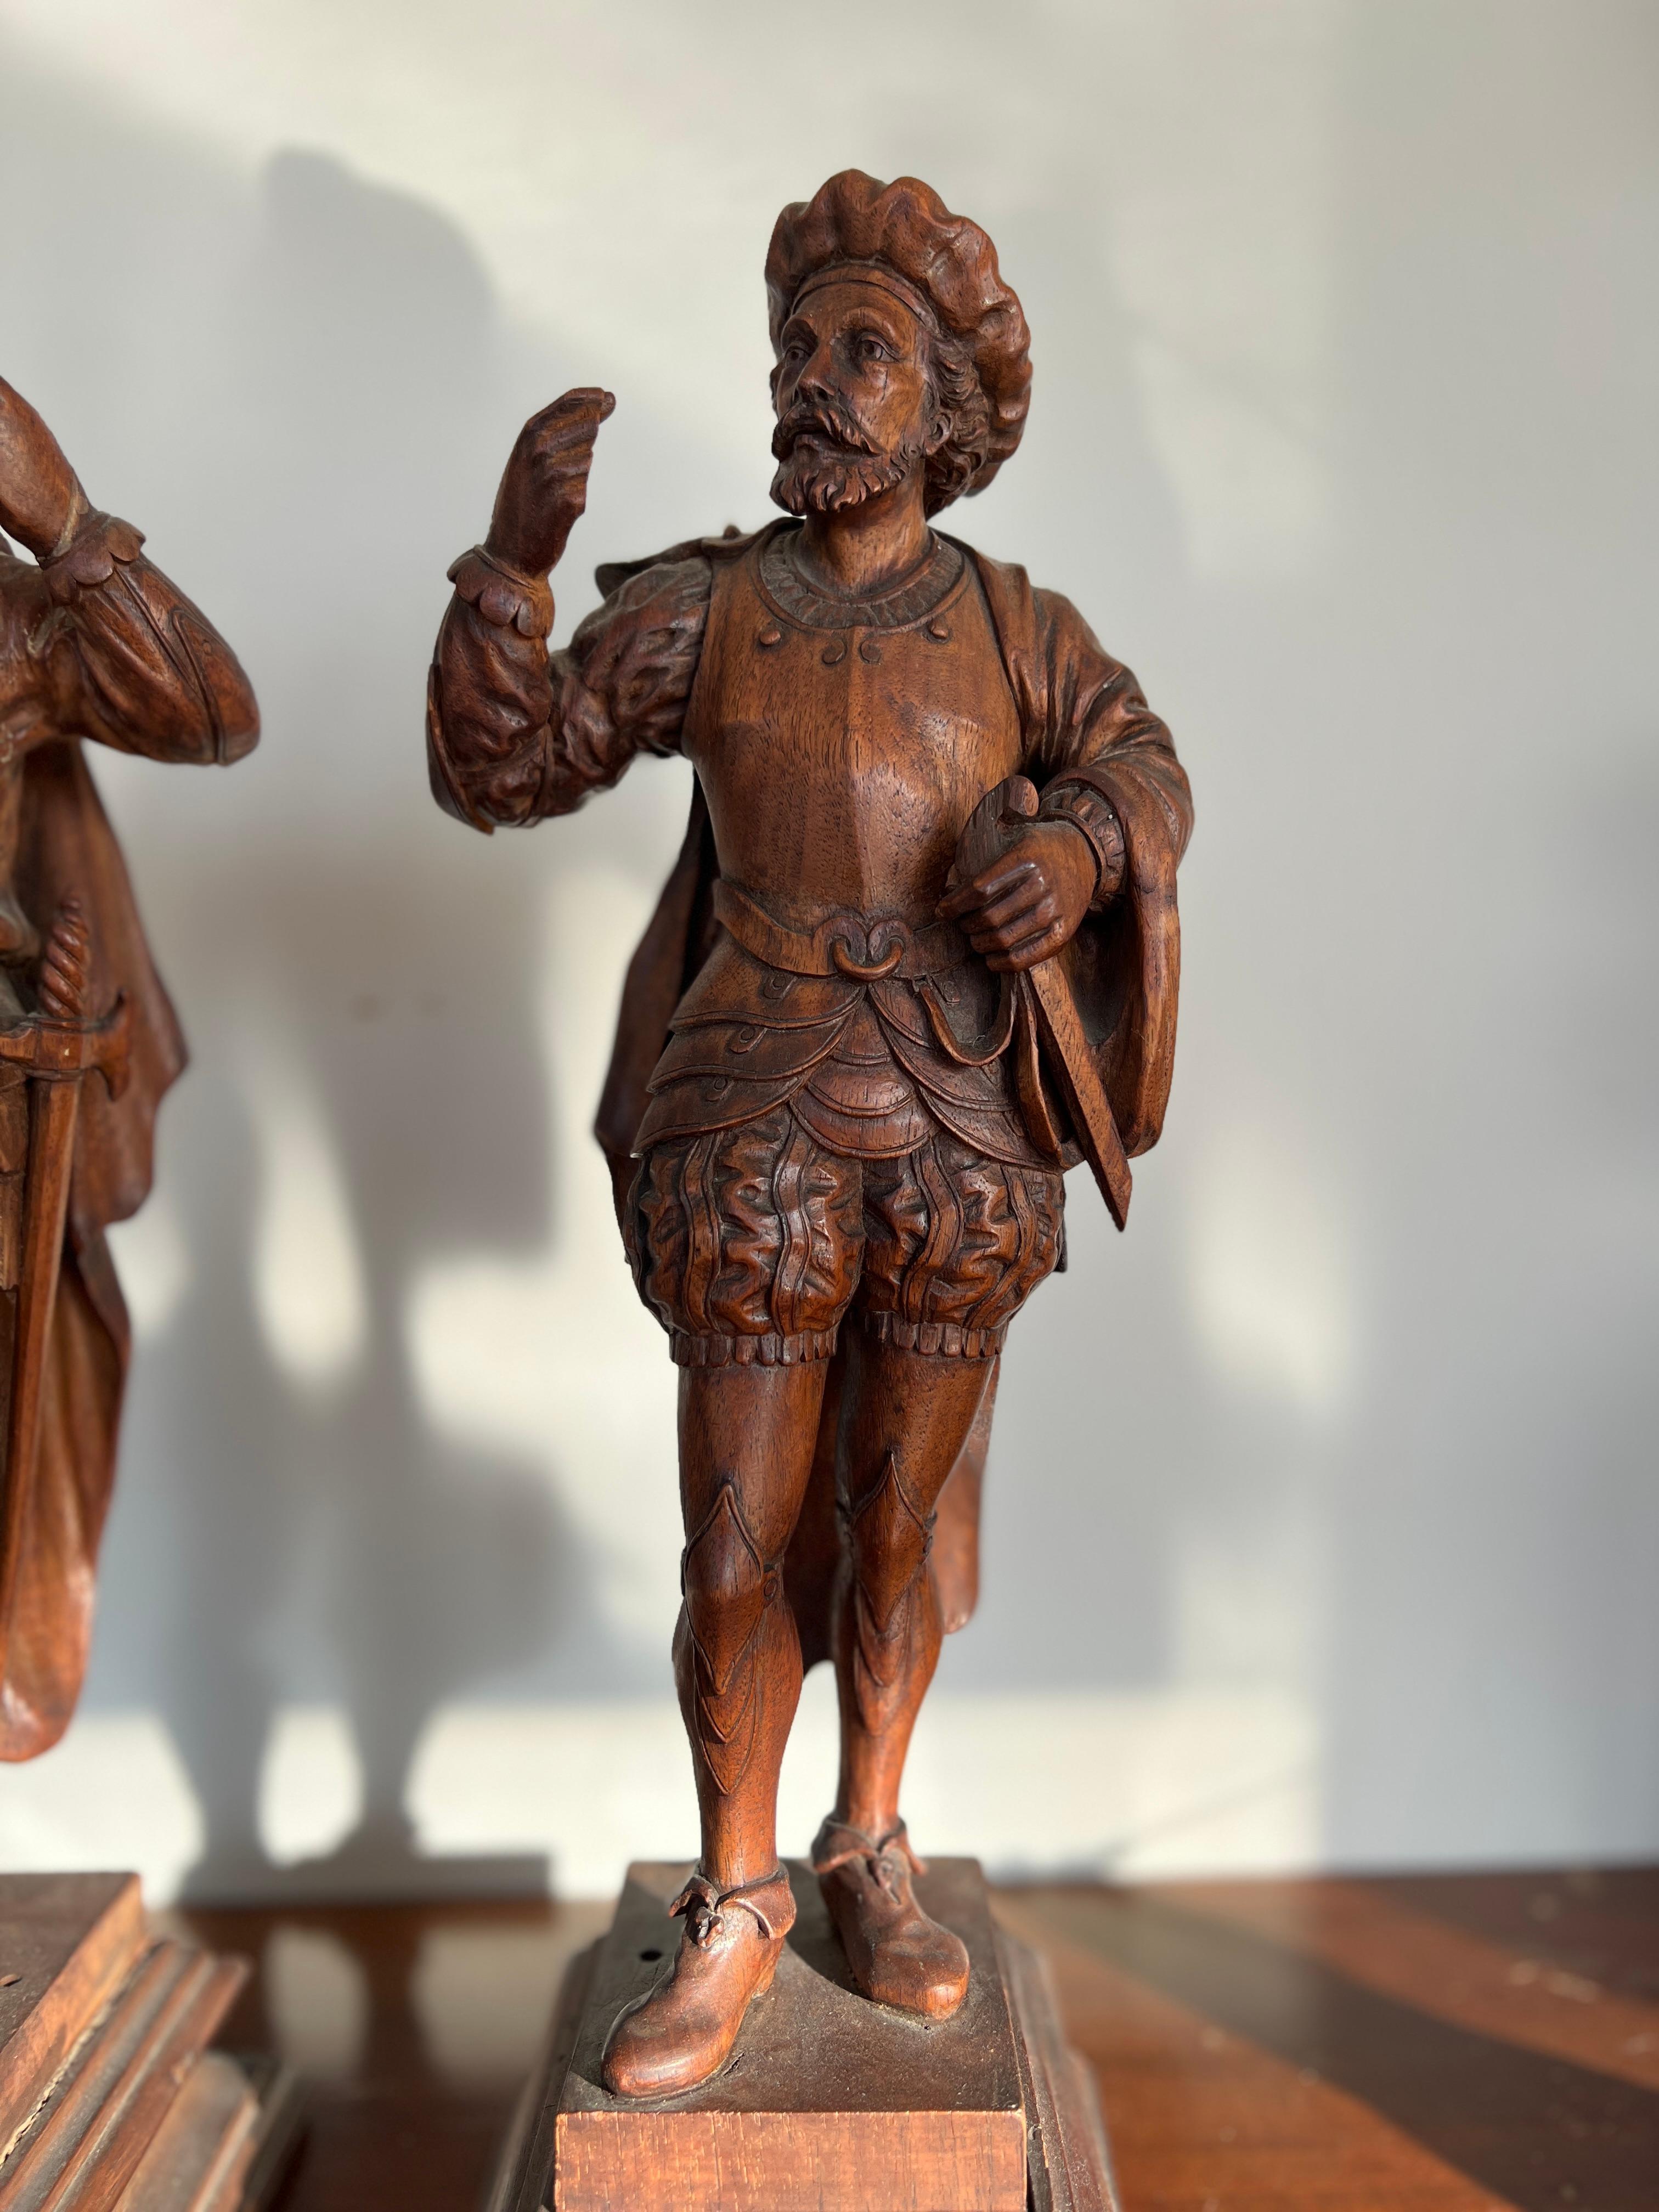 Likely Italian, but possibly German origin - 19th century

A pair of finely carved wood figures of Spanish Conquistadors or German Landsknecht. Each modeled in the Renaissance attire with detailed draped clothing, leather boots, swords and